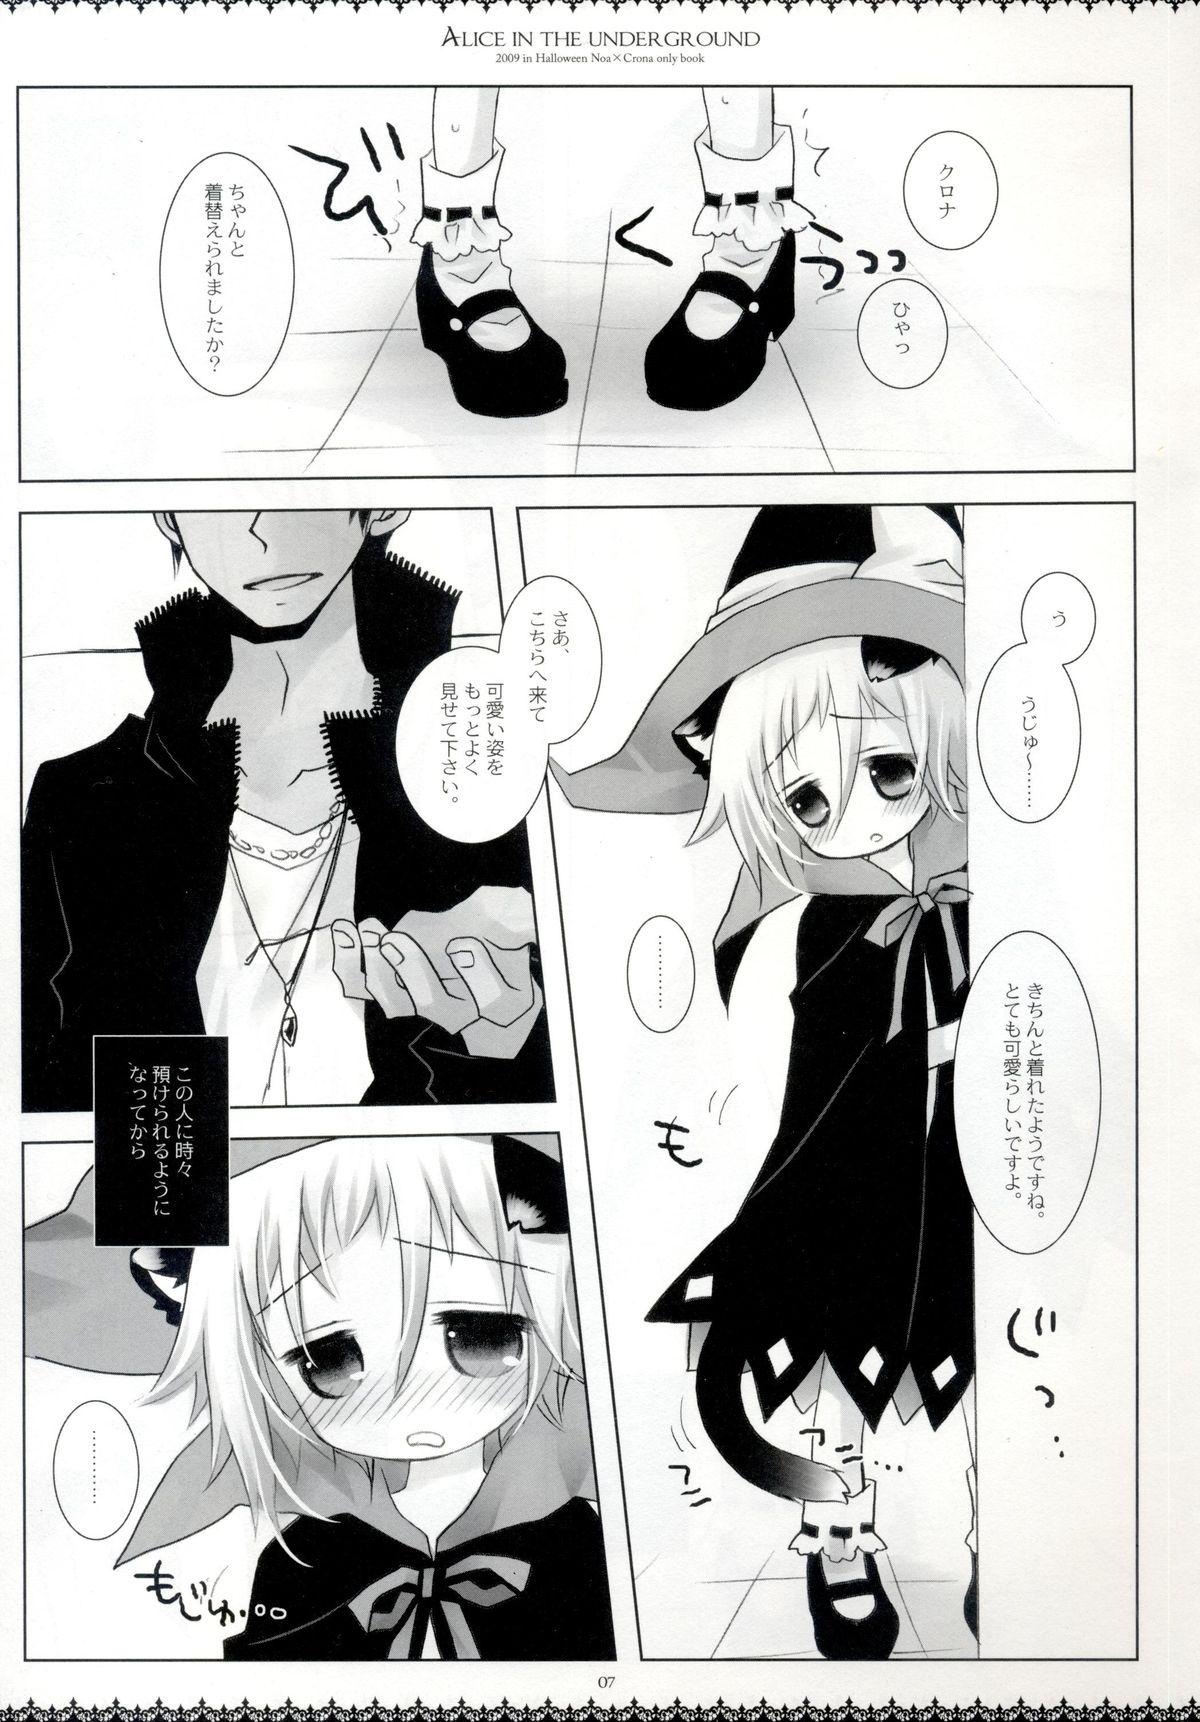 Gay Shop Alice in the underground - Soul eater Penis - Page 6